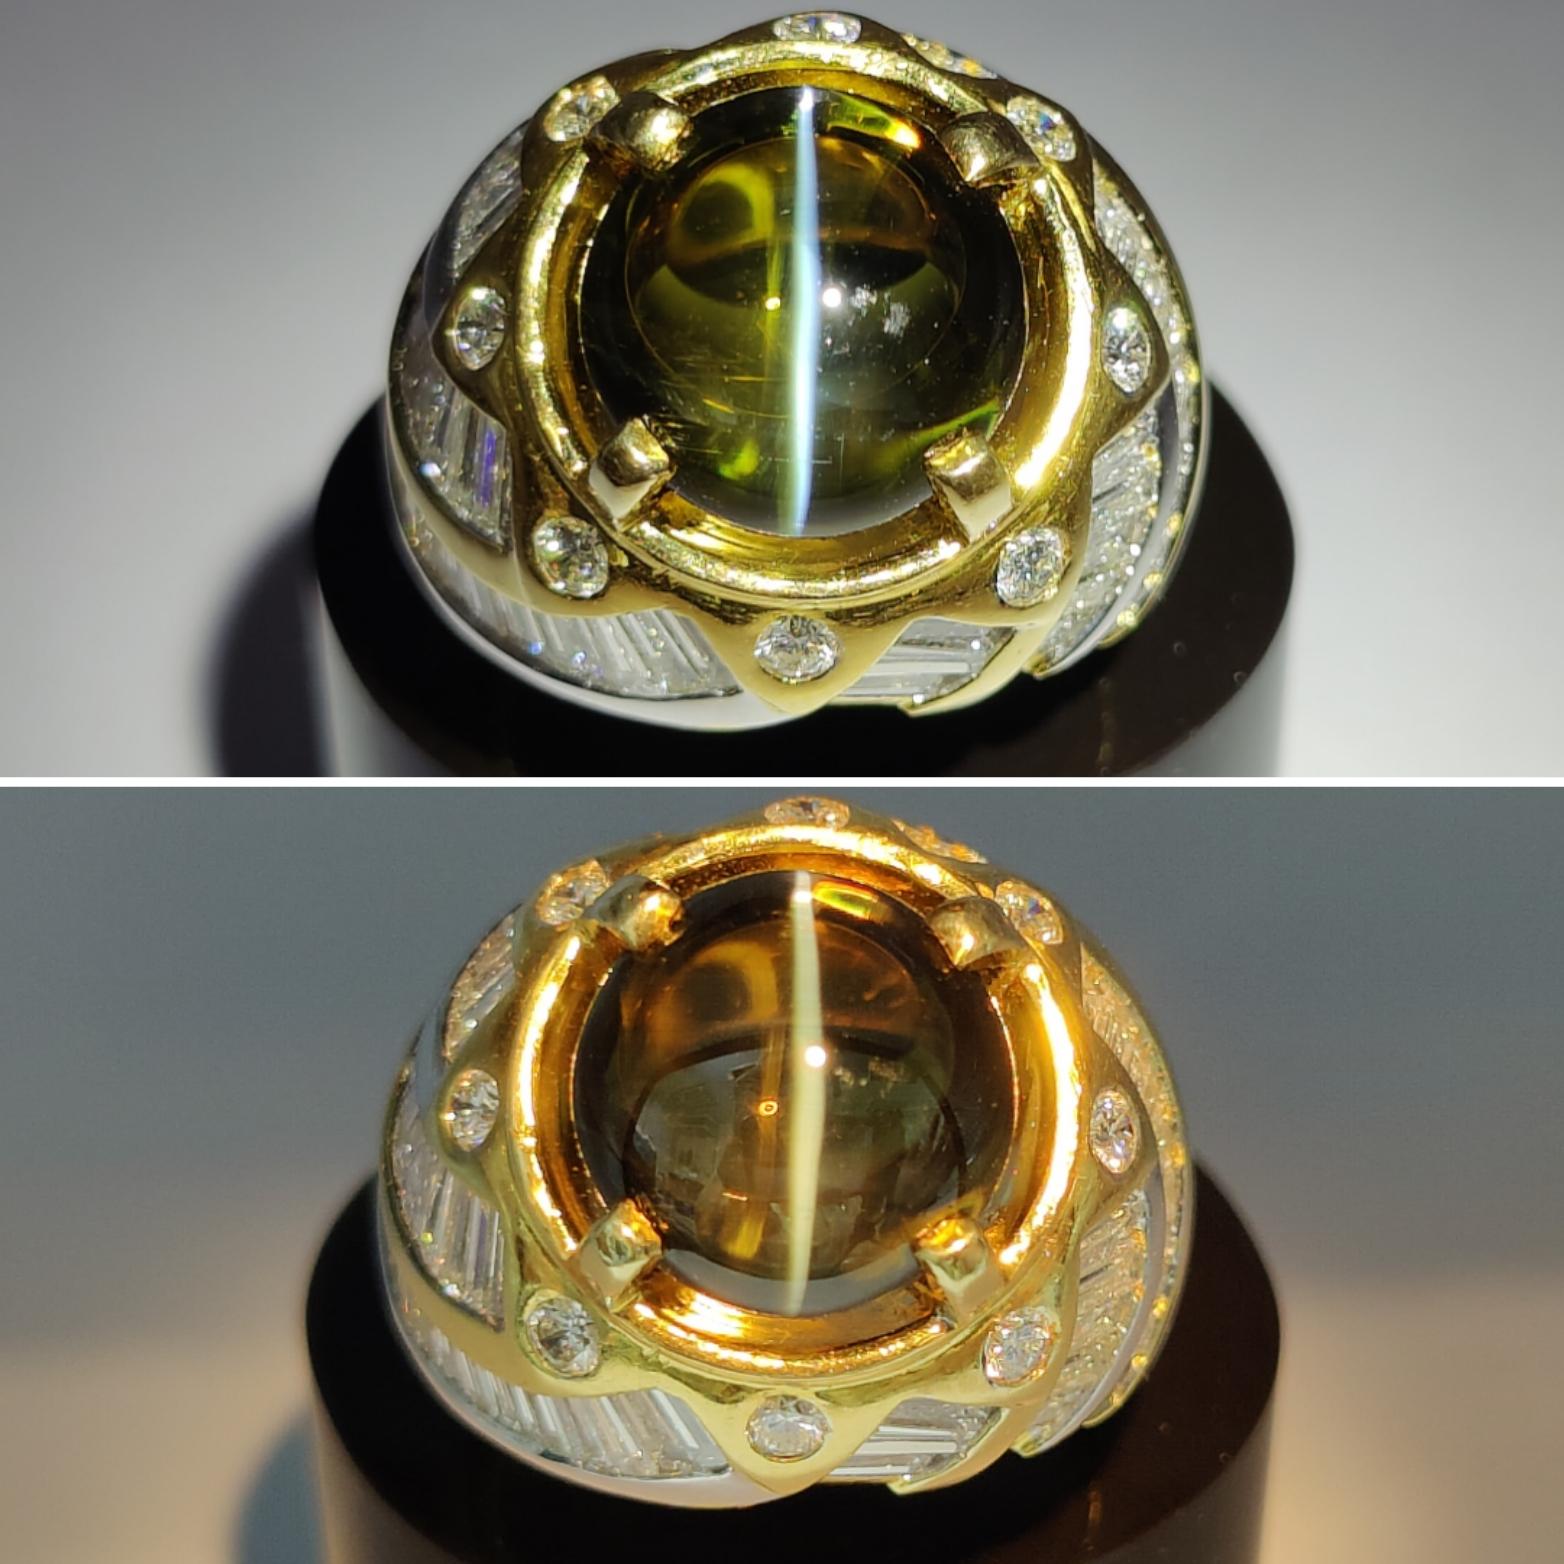 This bold, contemporary dome ring will not go unnoticed!

One of the most sought-after colored gemstones in the world, the Chrysoberyl Cat's Eye possesses not just one, but two rare abilities; its chatoyancy aka cat's eye effect that gives it its